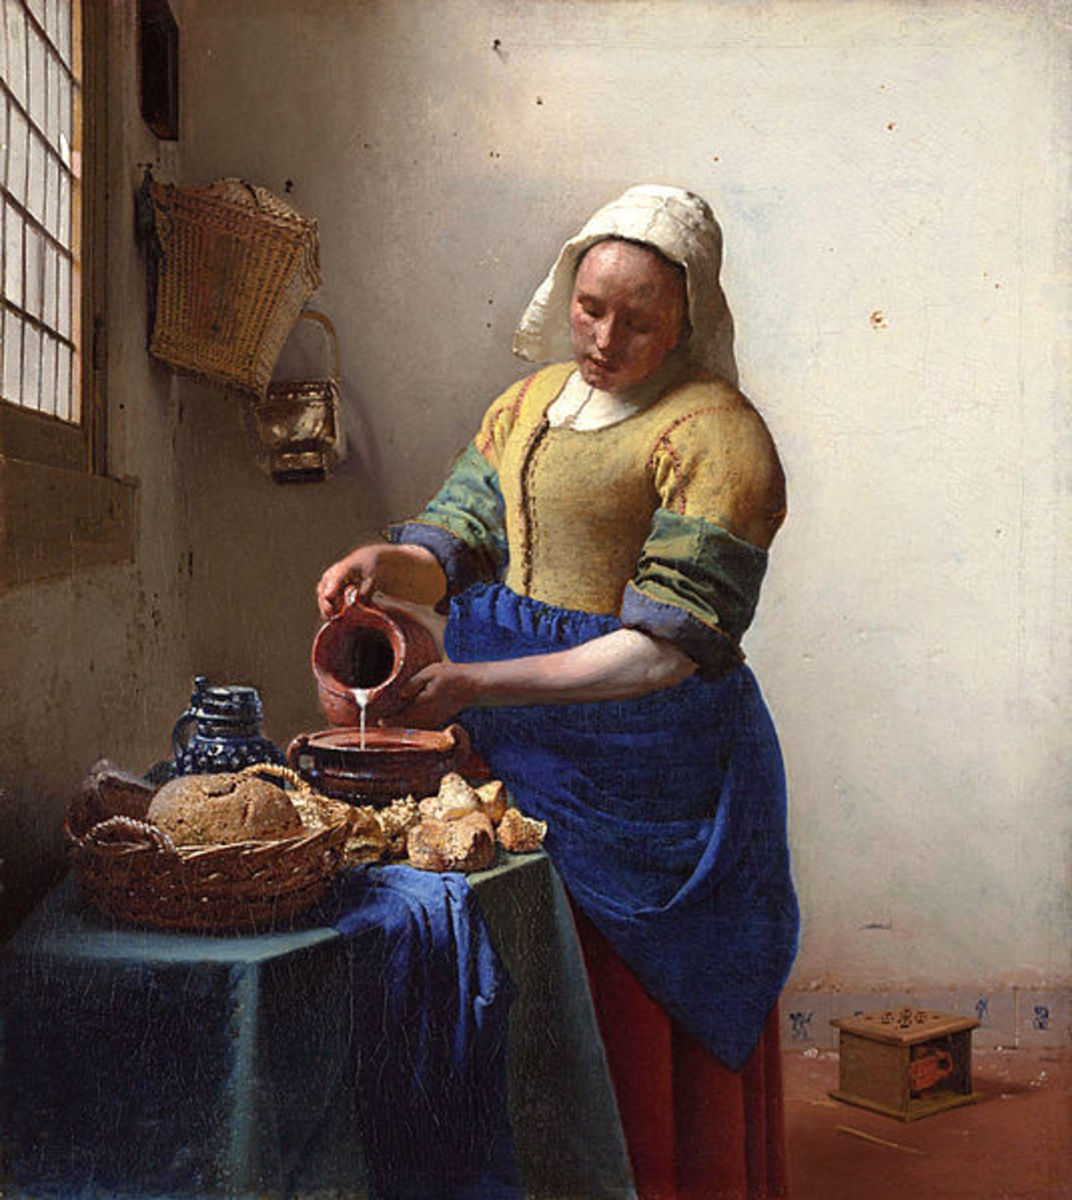 vermeer-poems-from-the-interior